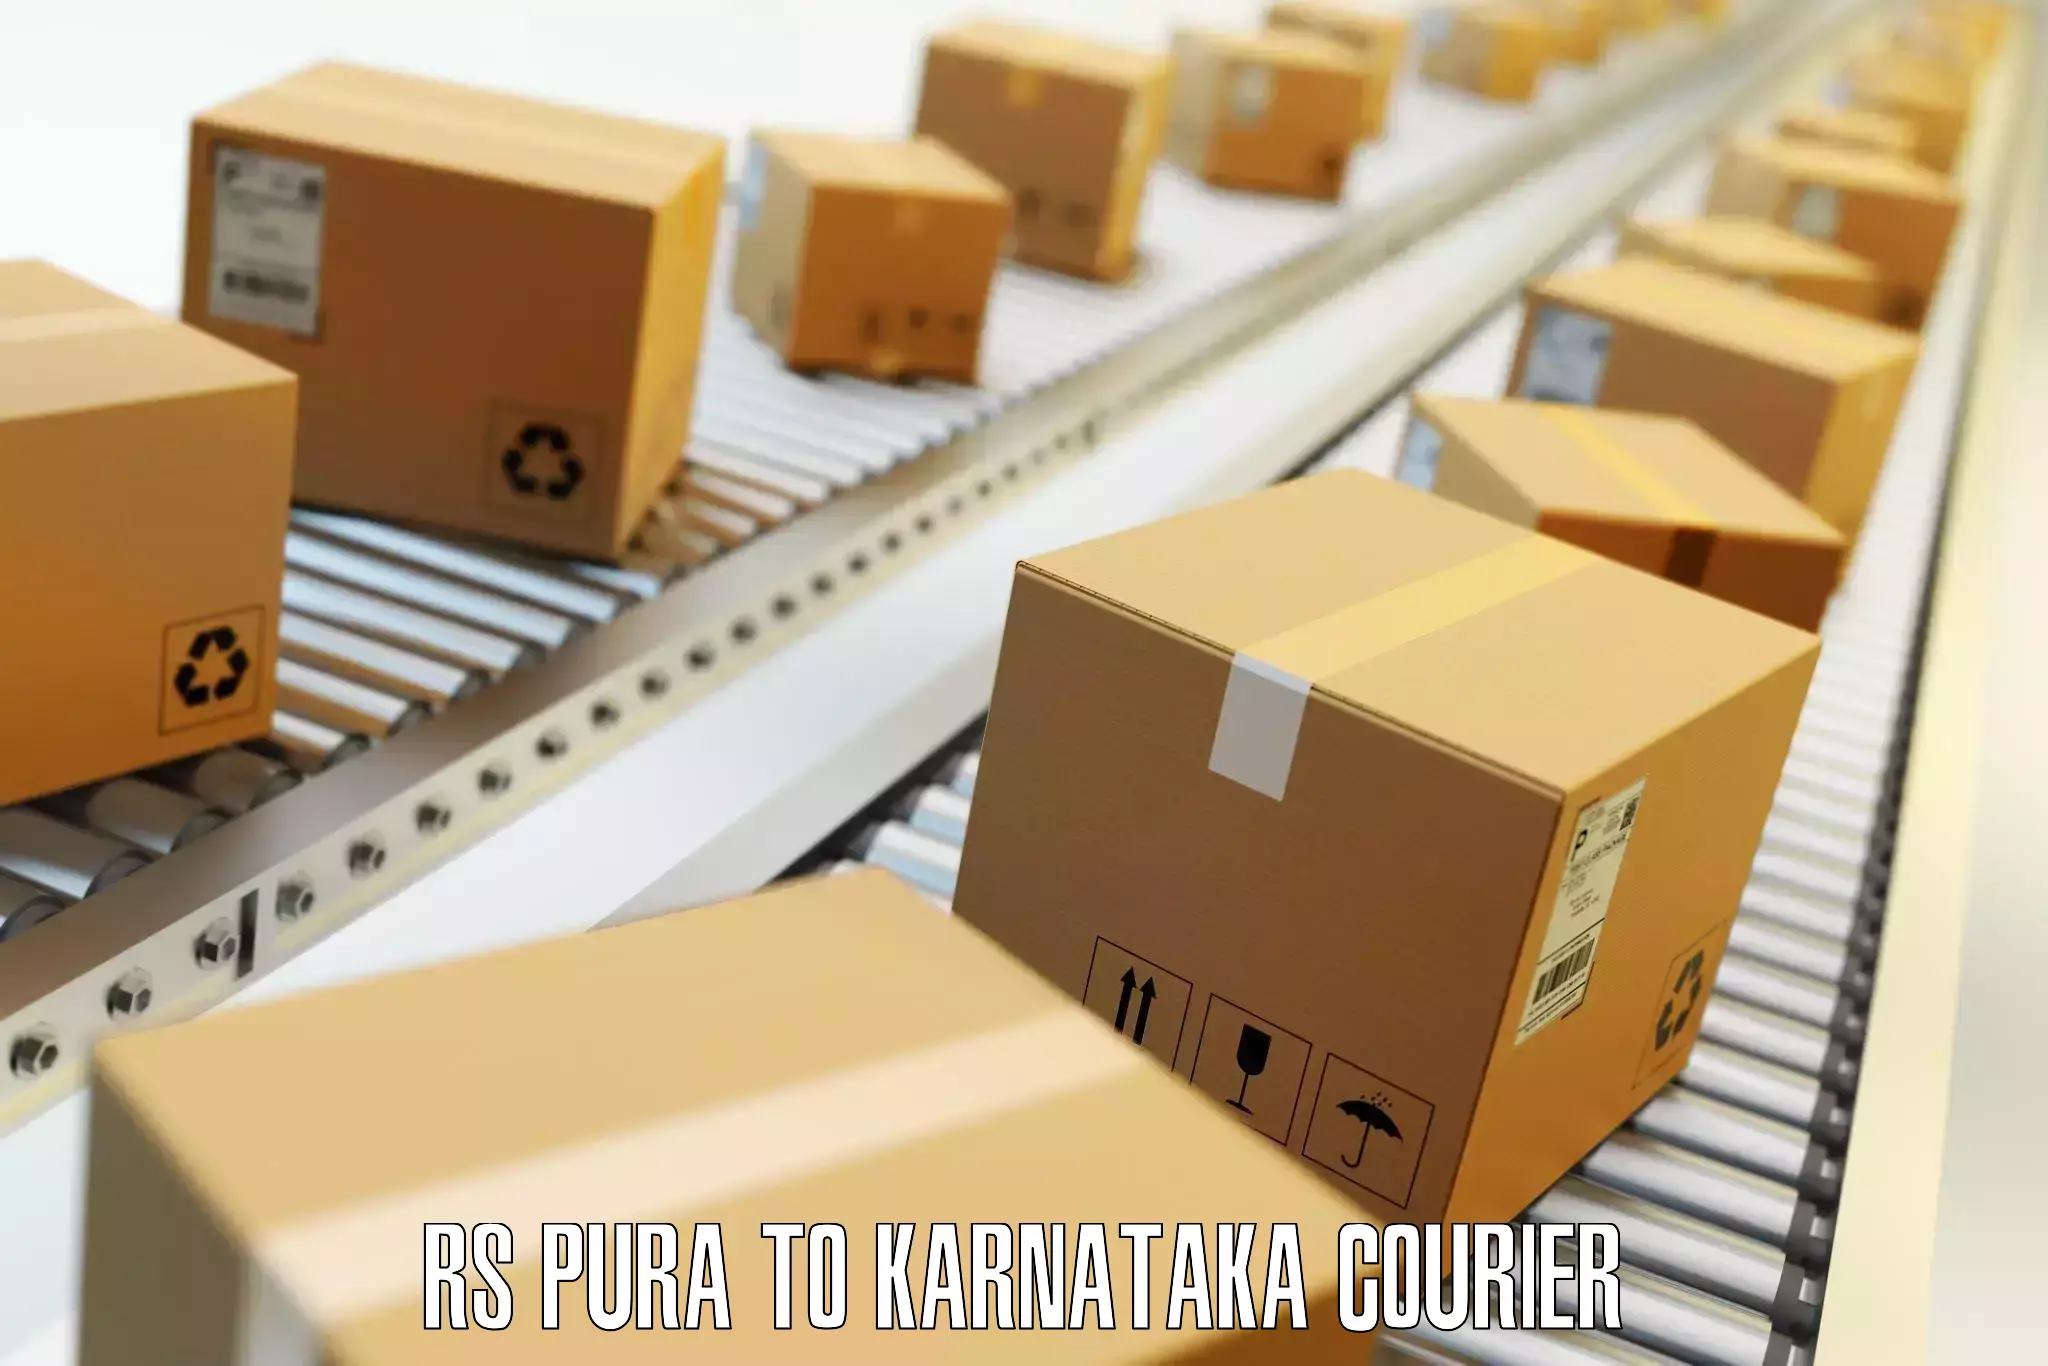 Luggage transport consultancy RS Pura to Jagalur